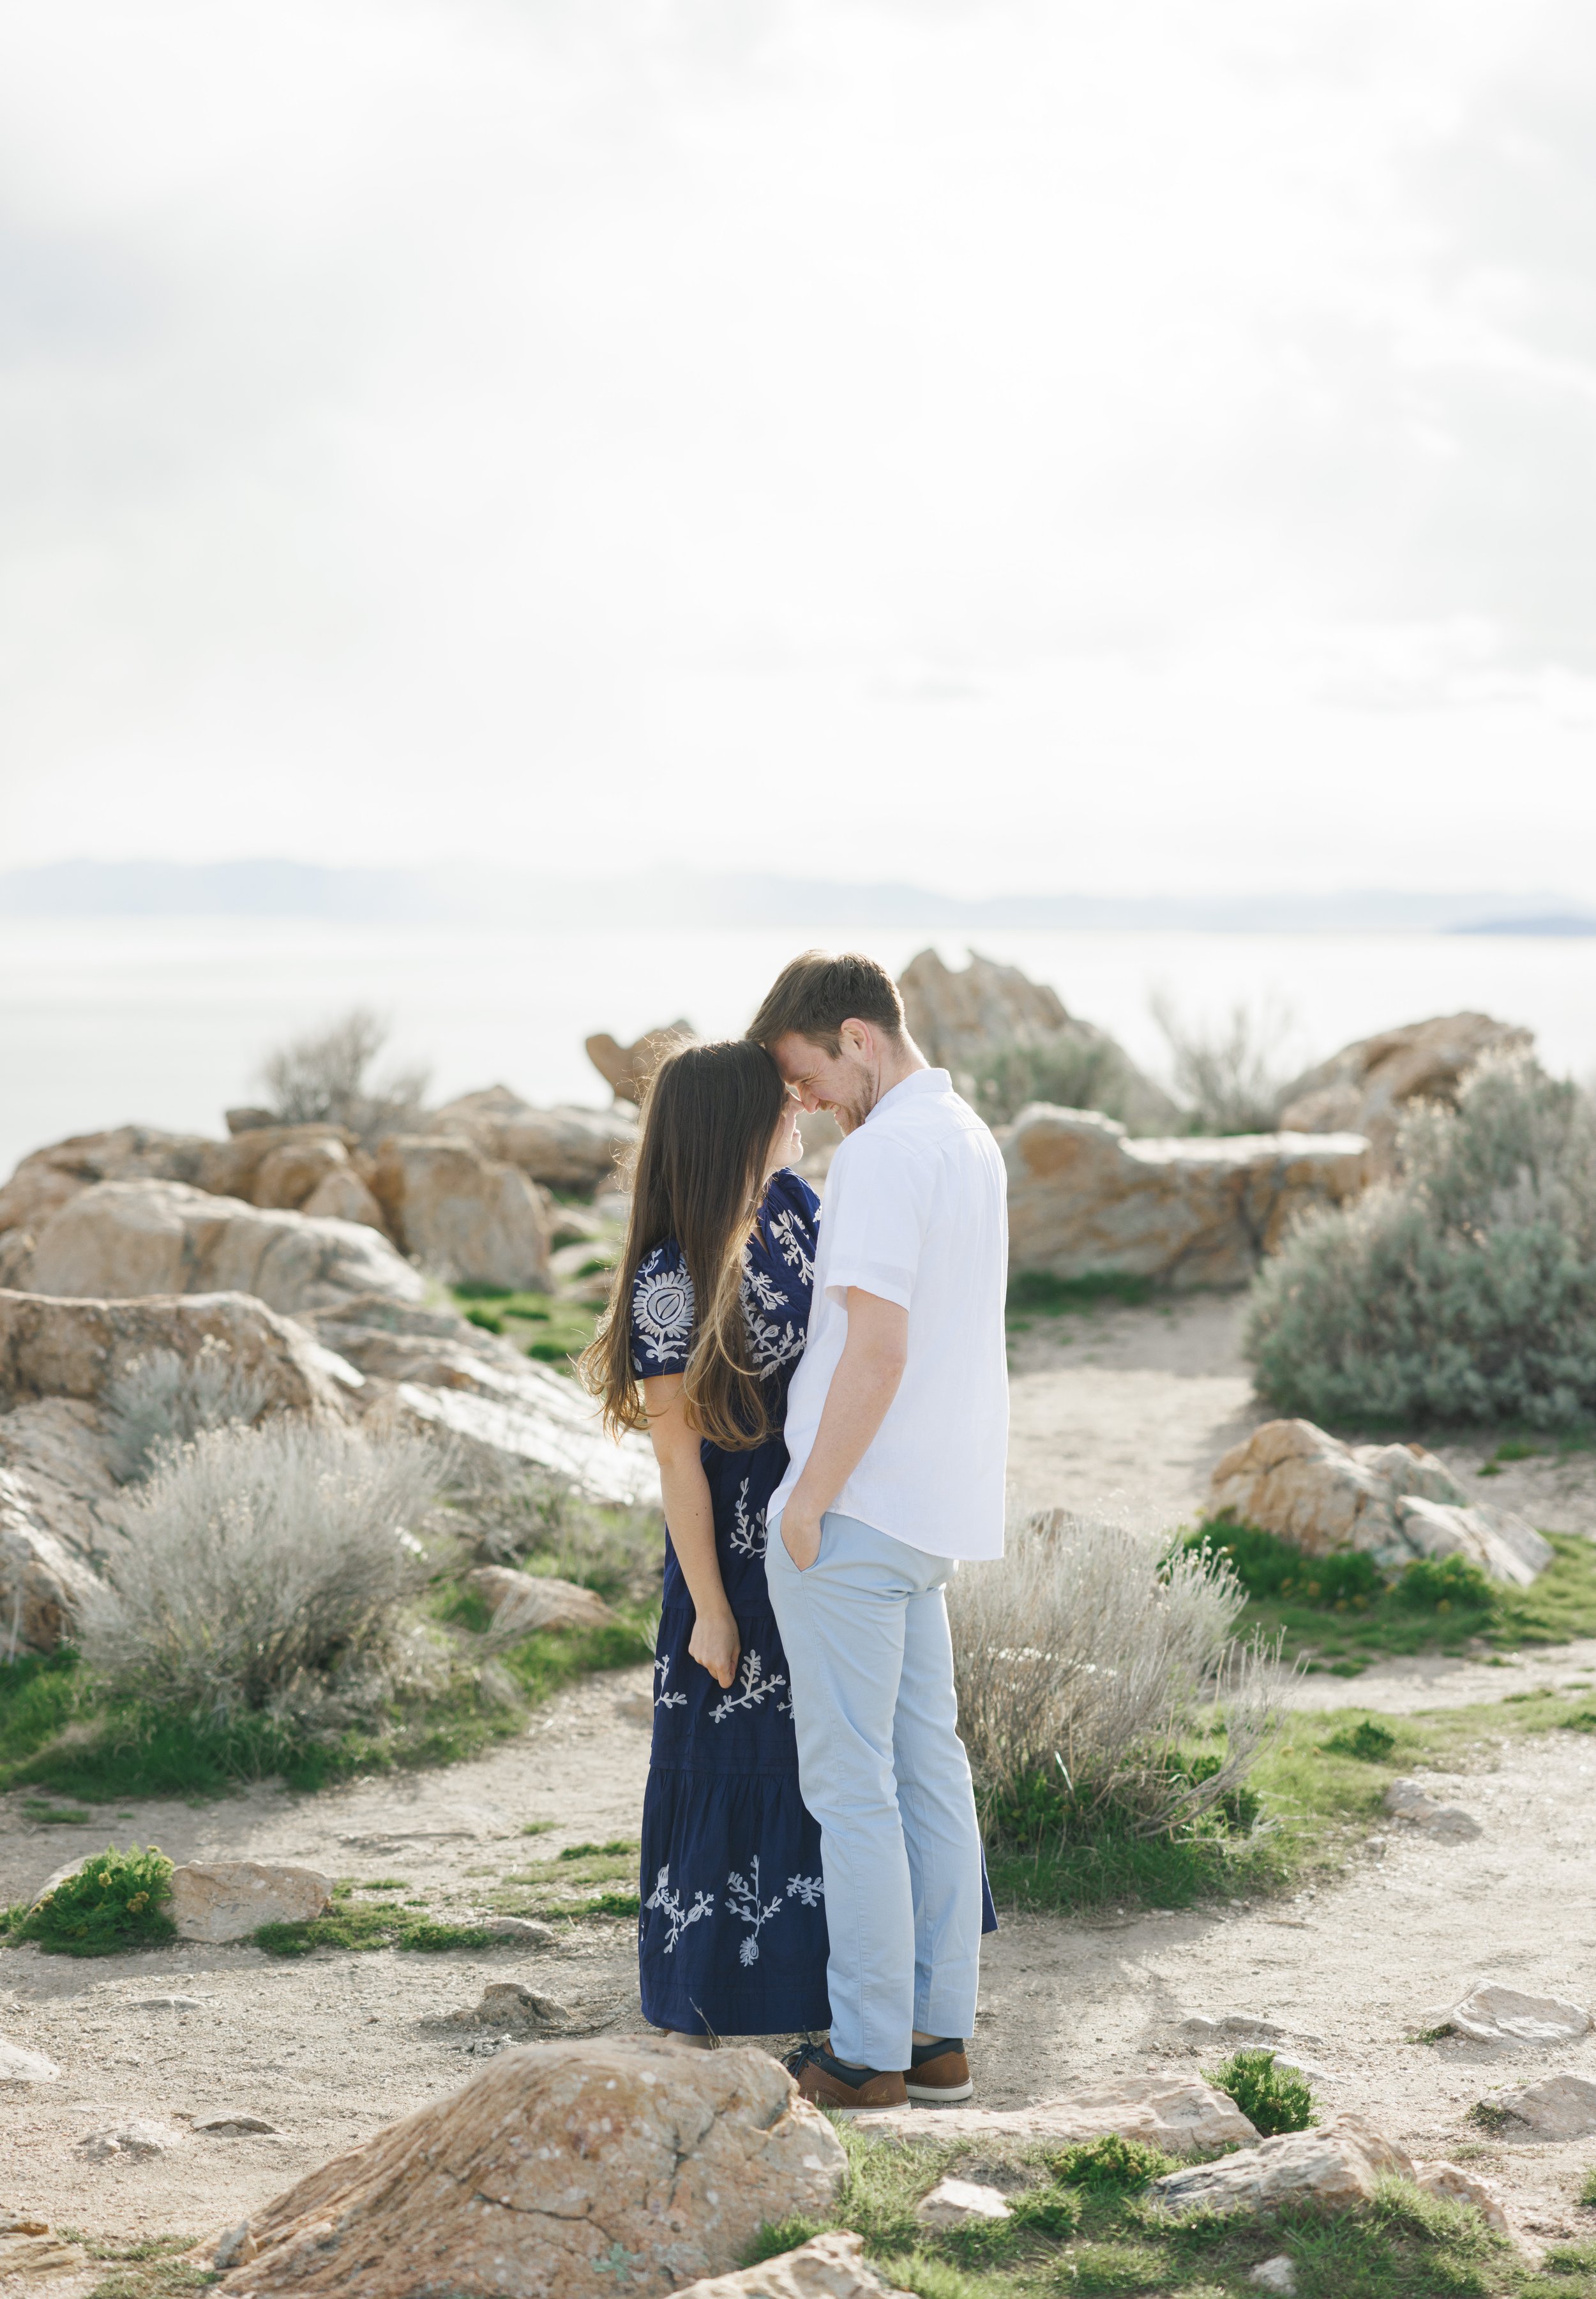  Overlooking the Great Salt Lake a couple stands on Antelope Island for engagements by Savanna Richardson PPhotograpphy. foreheads together pose high end engagements #SavannaRichardsonPhotography #SavannaRichardsonEngagements #UtahEngagements #Antelo